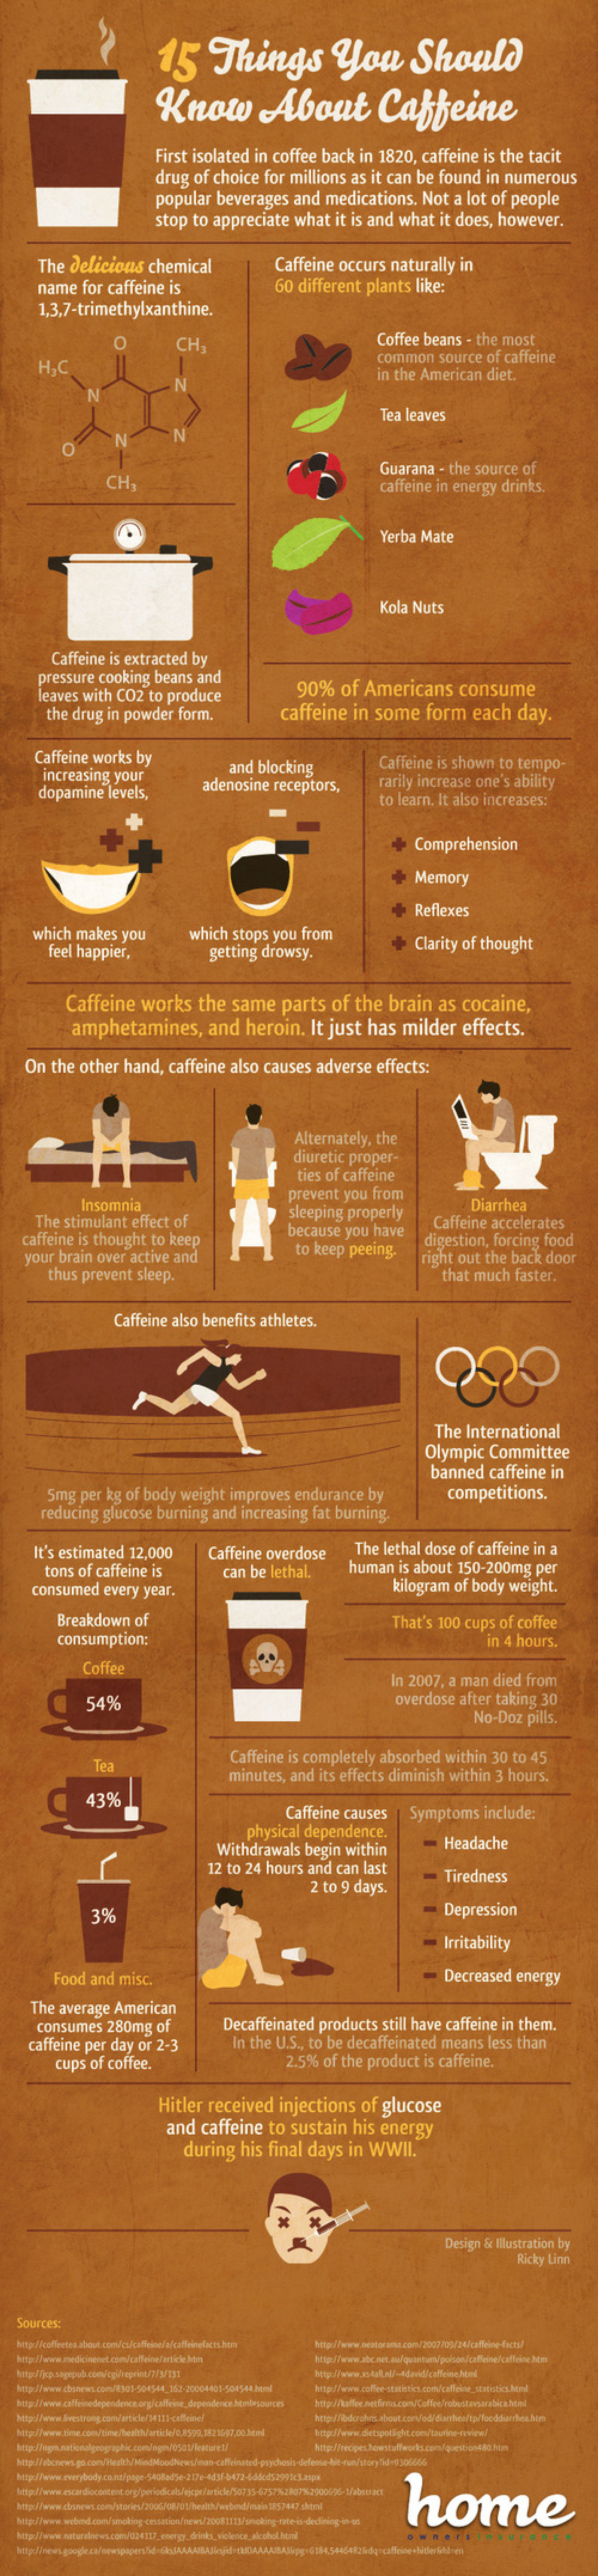 Important Facts About Caffeine Infographic